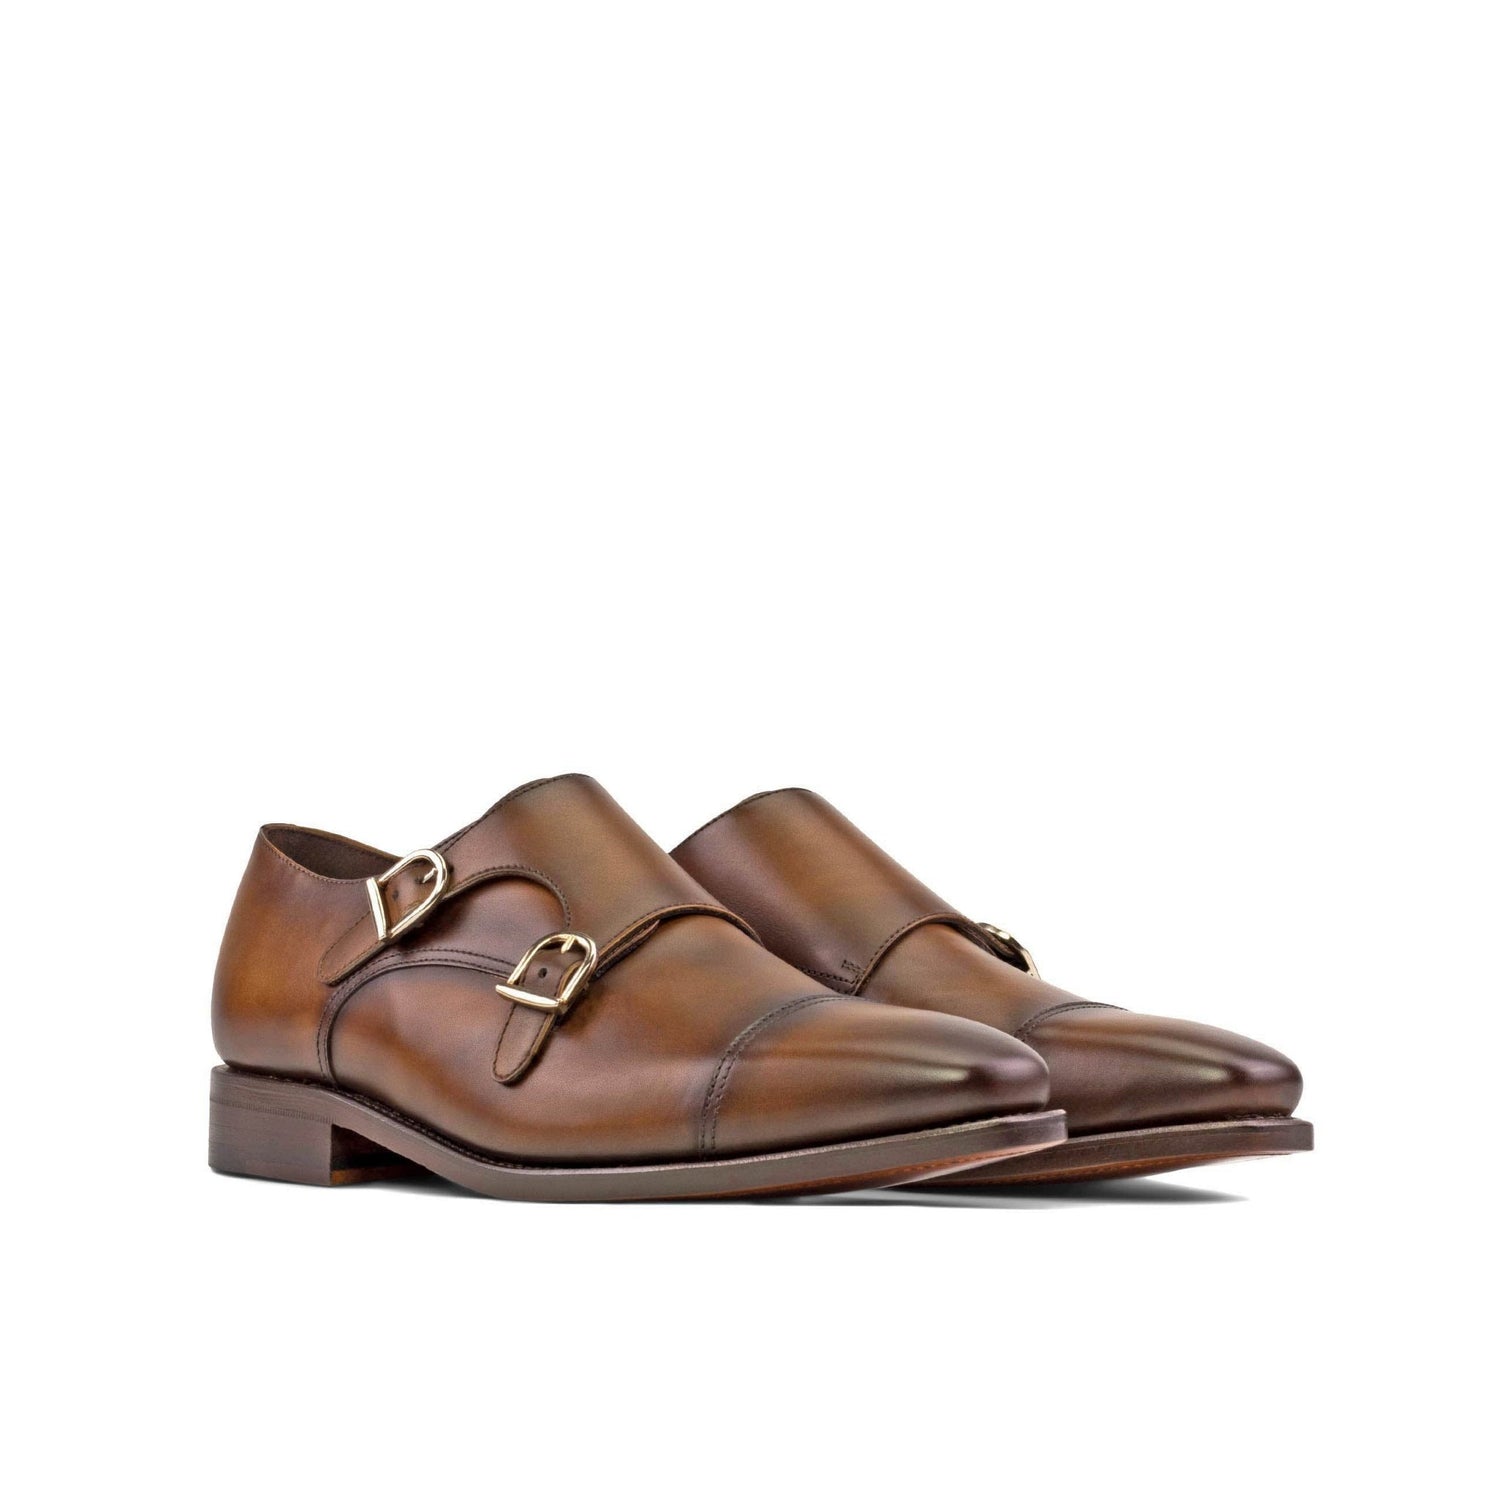 Double Monk in Medium Brown Box Calf - Zatorres | Free Shipping on orders over $200